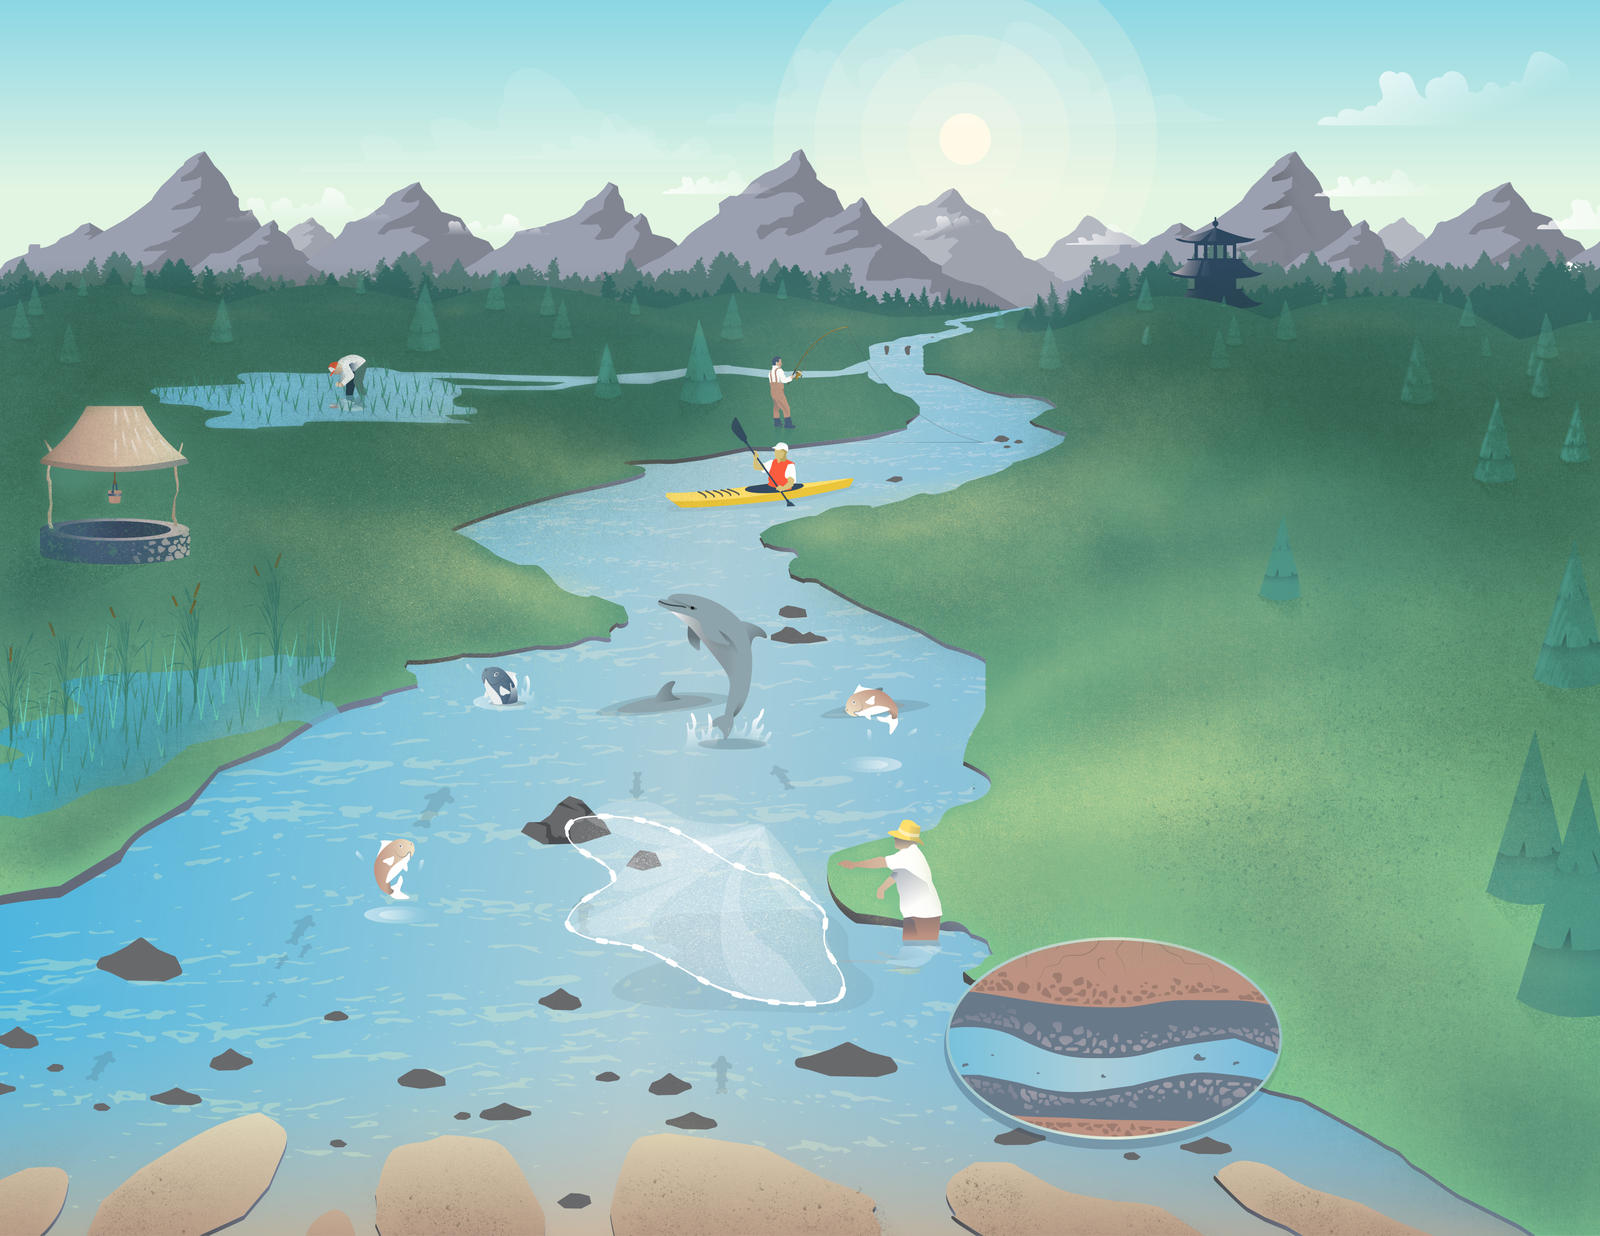 Illustration of a healthy, free-flowing river